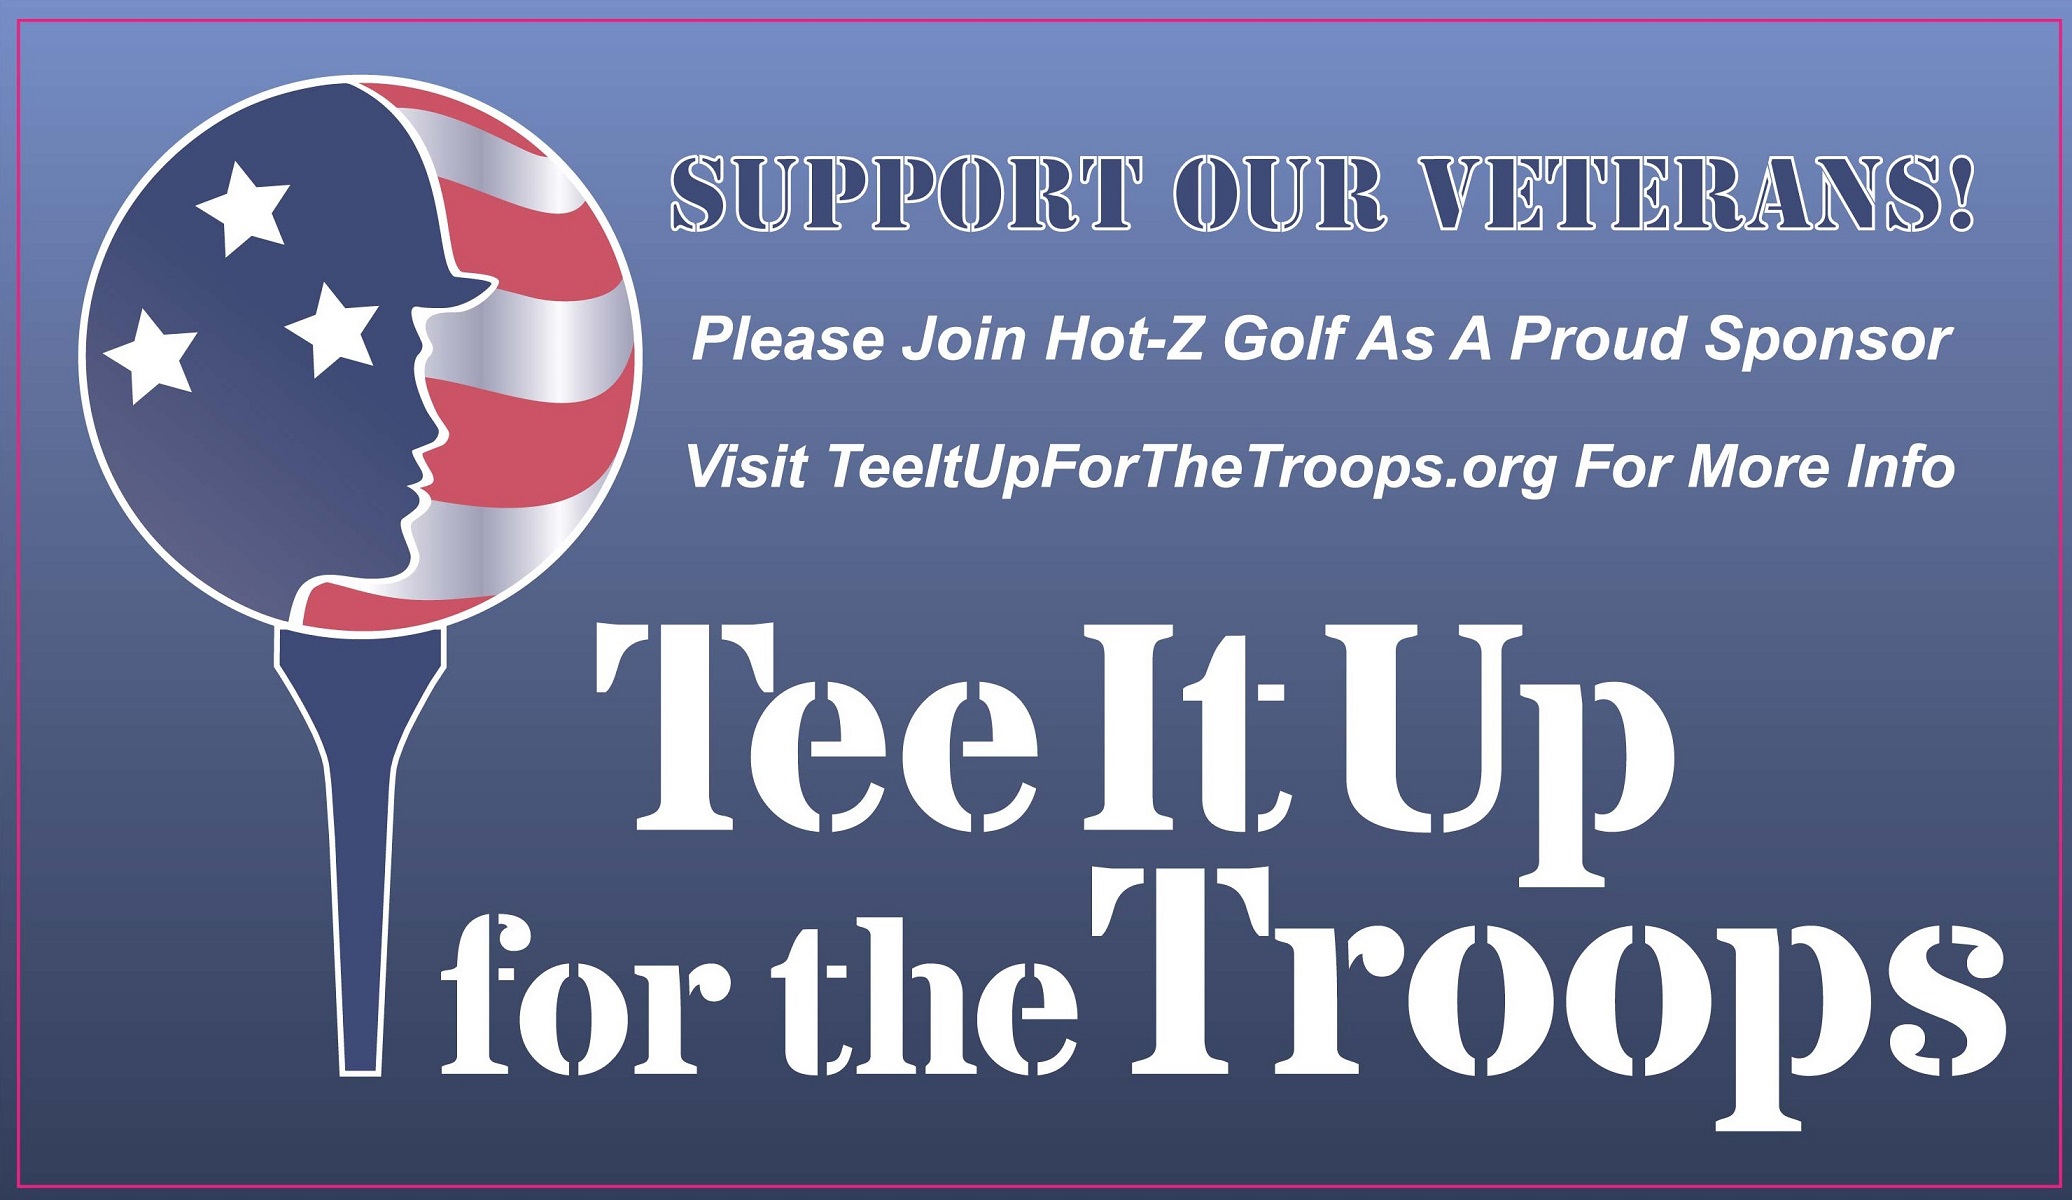 tee it up for the troops banner image - Hot-Z USA Military Bags